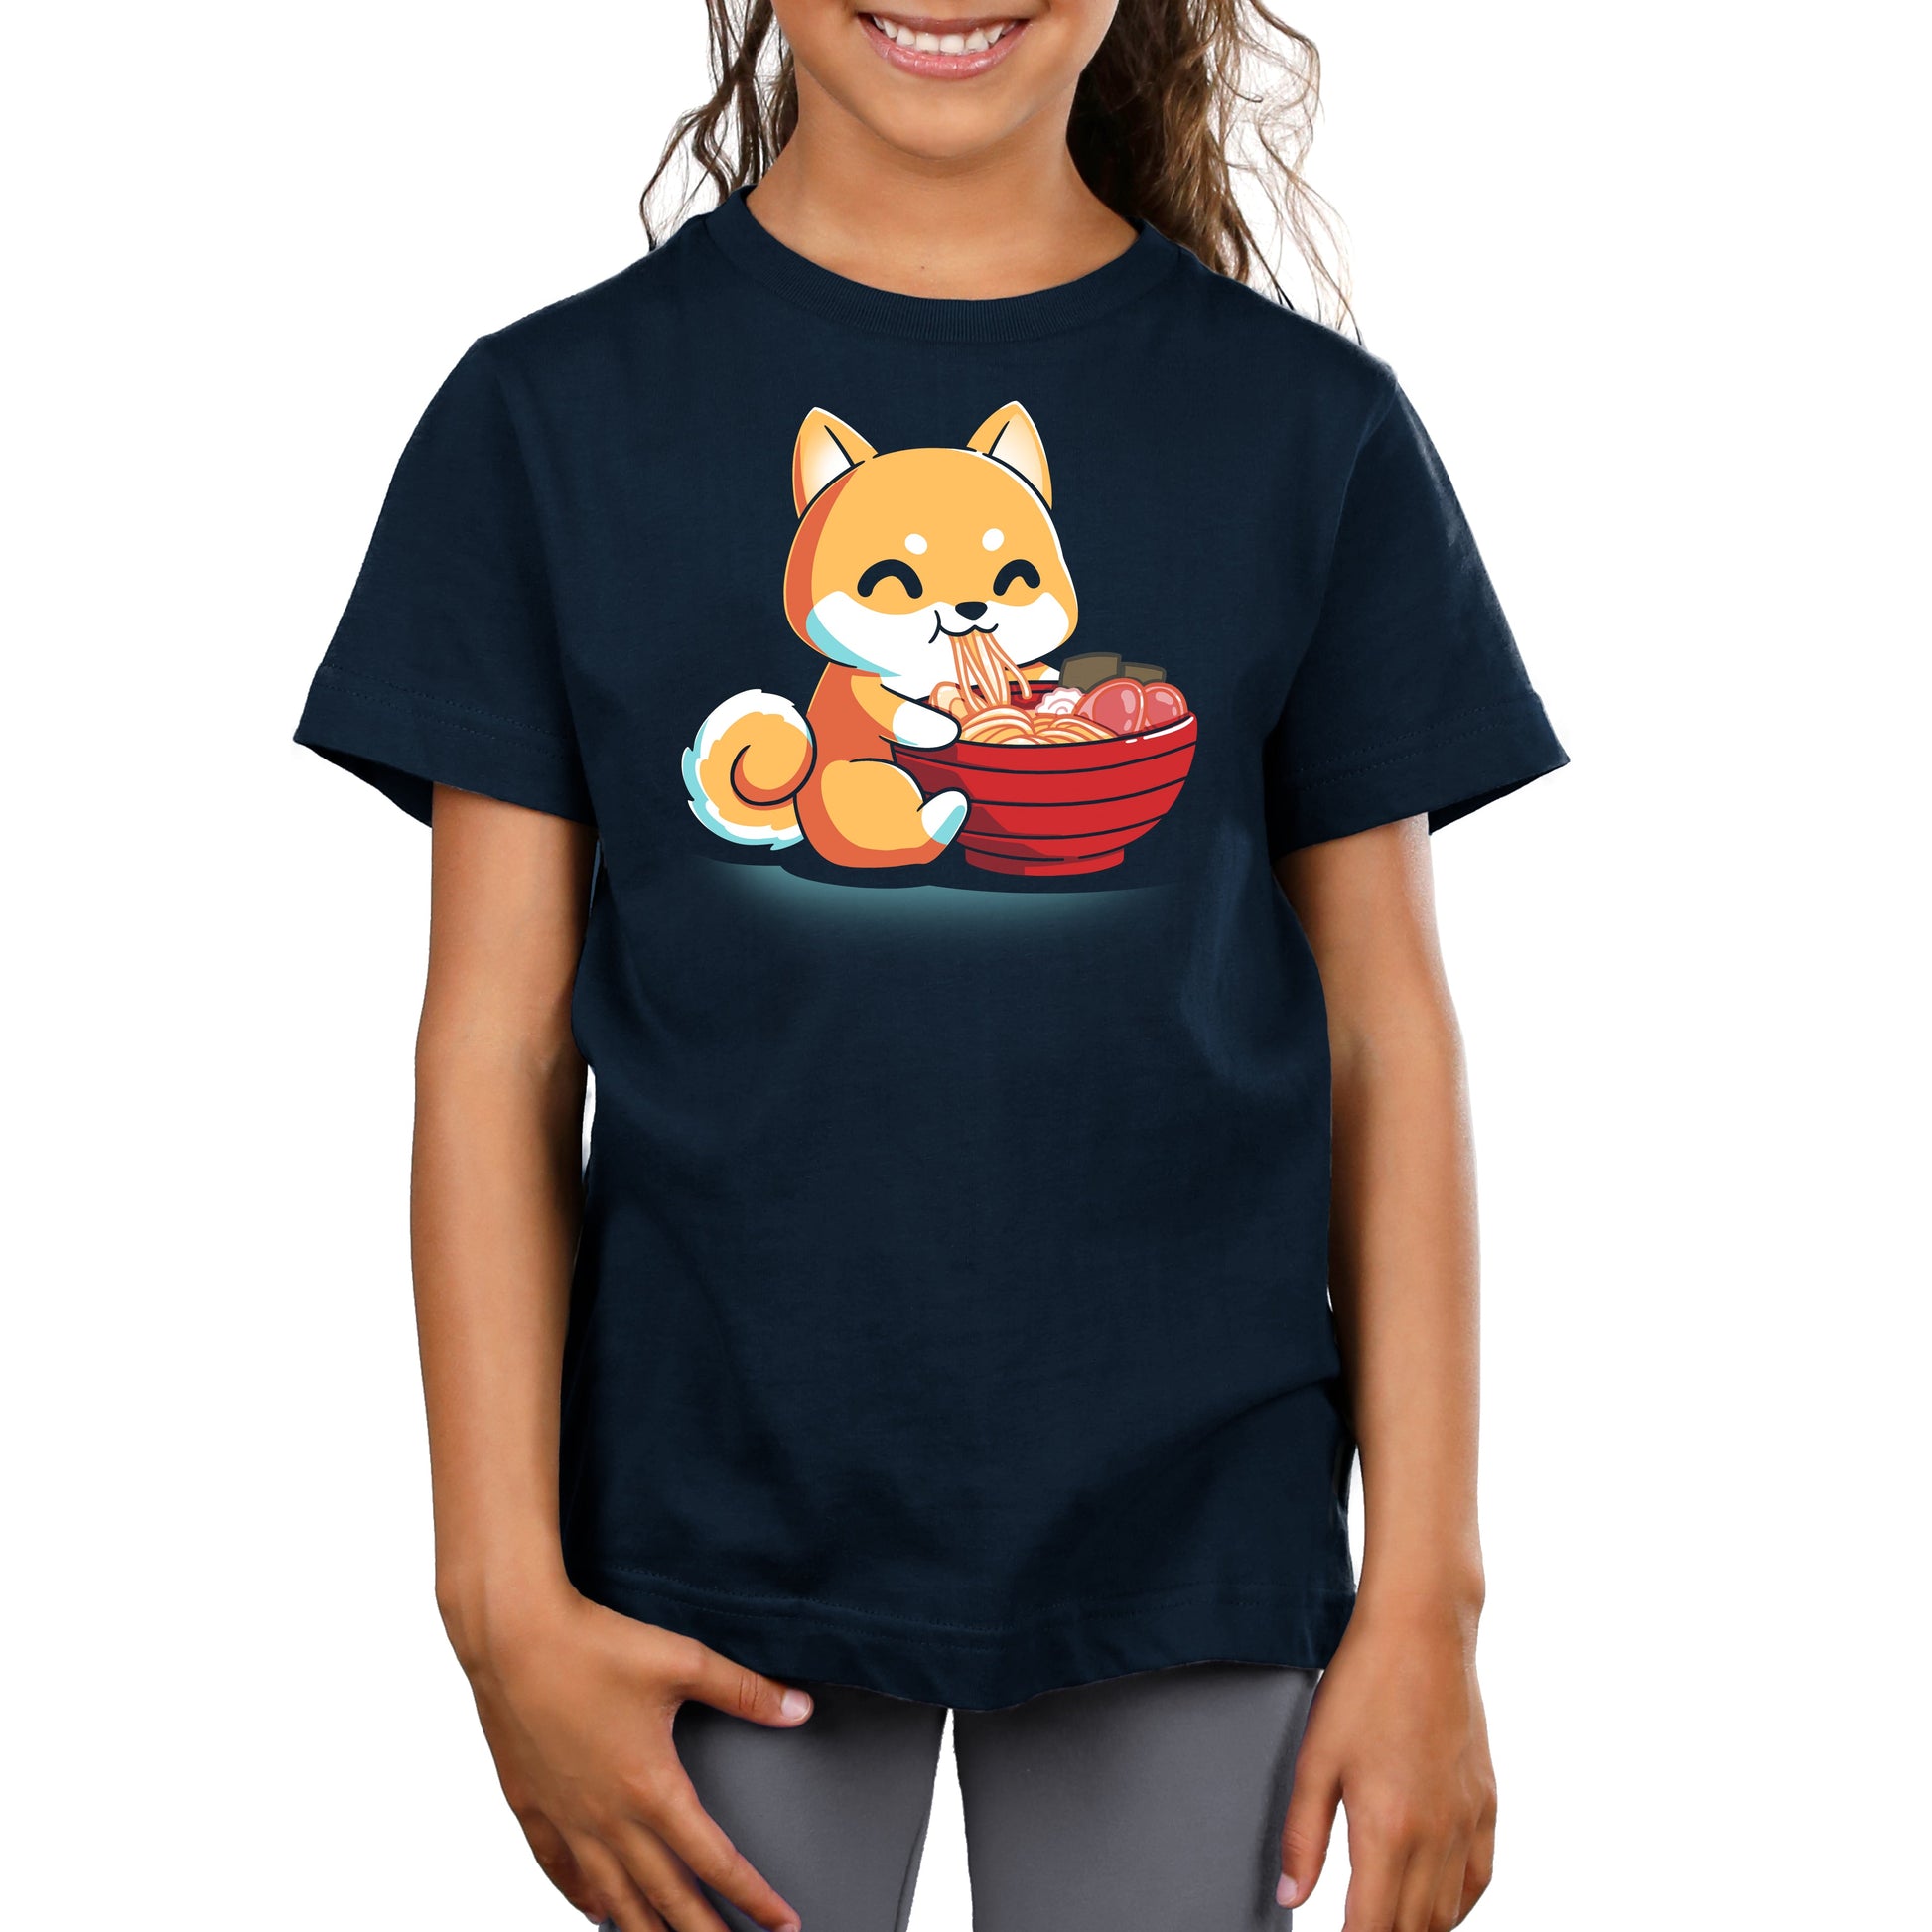 Young girl wearing a navy blue t-shirt made from Super Soft Ringspun Cotton, featuring a cartoon Ramen Shiba eating noodles from a red bowl by monsterdigital.